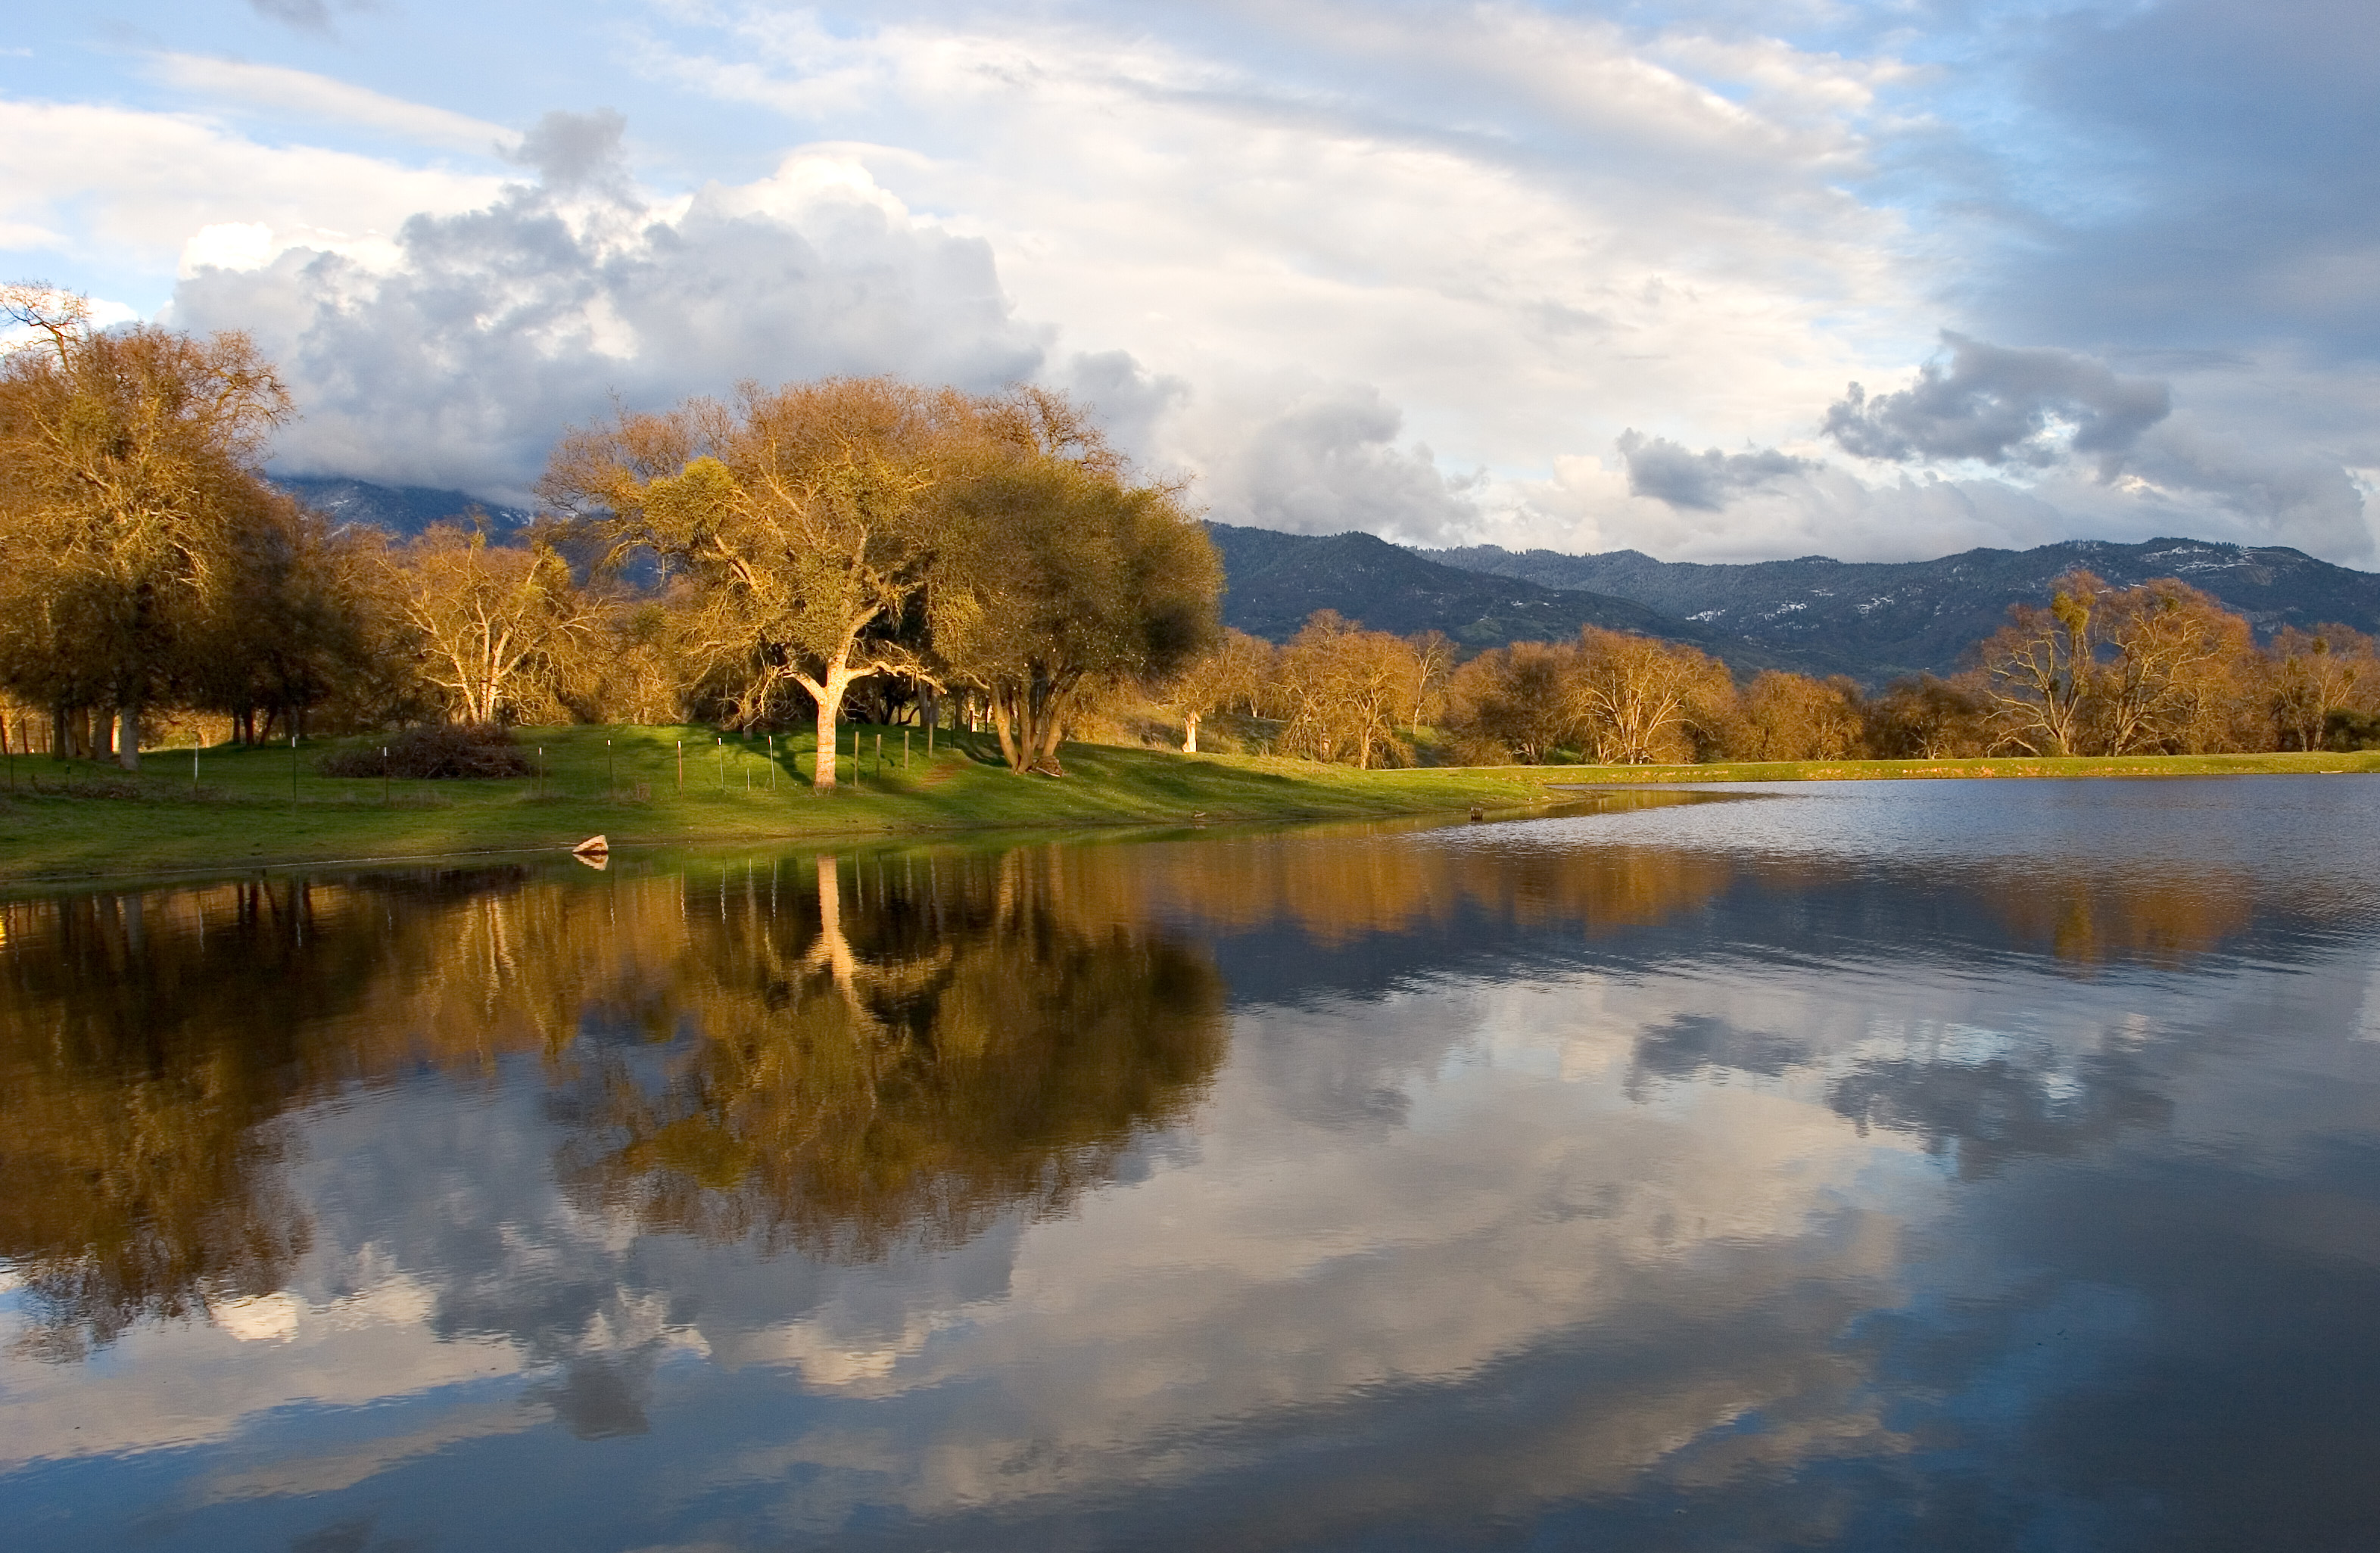 A view of the Sierra mountains with the pond at the Circle J-Norris Ranch in the foreground